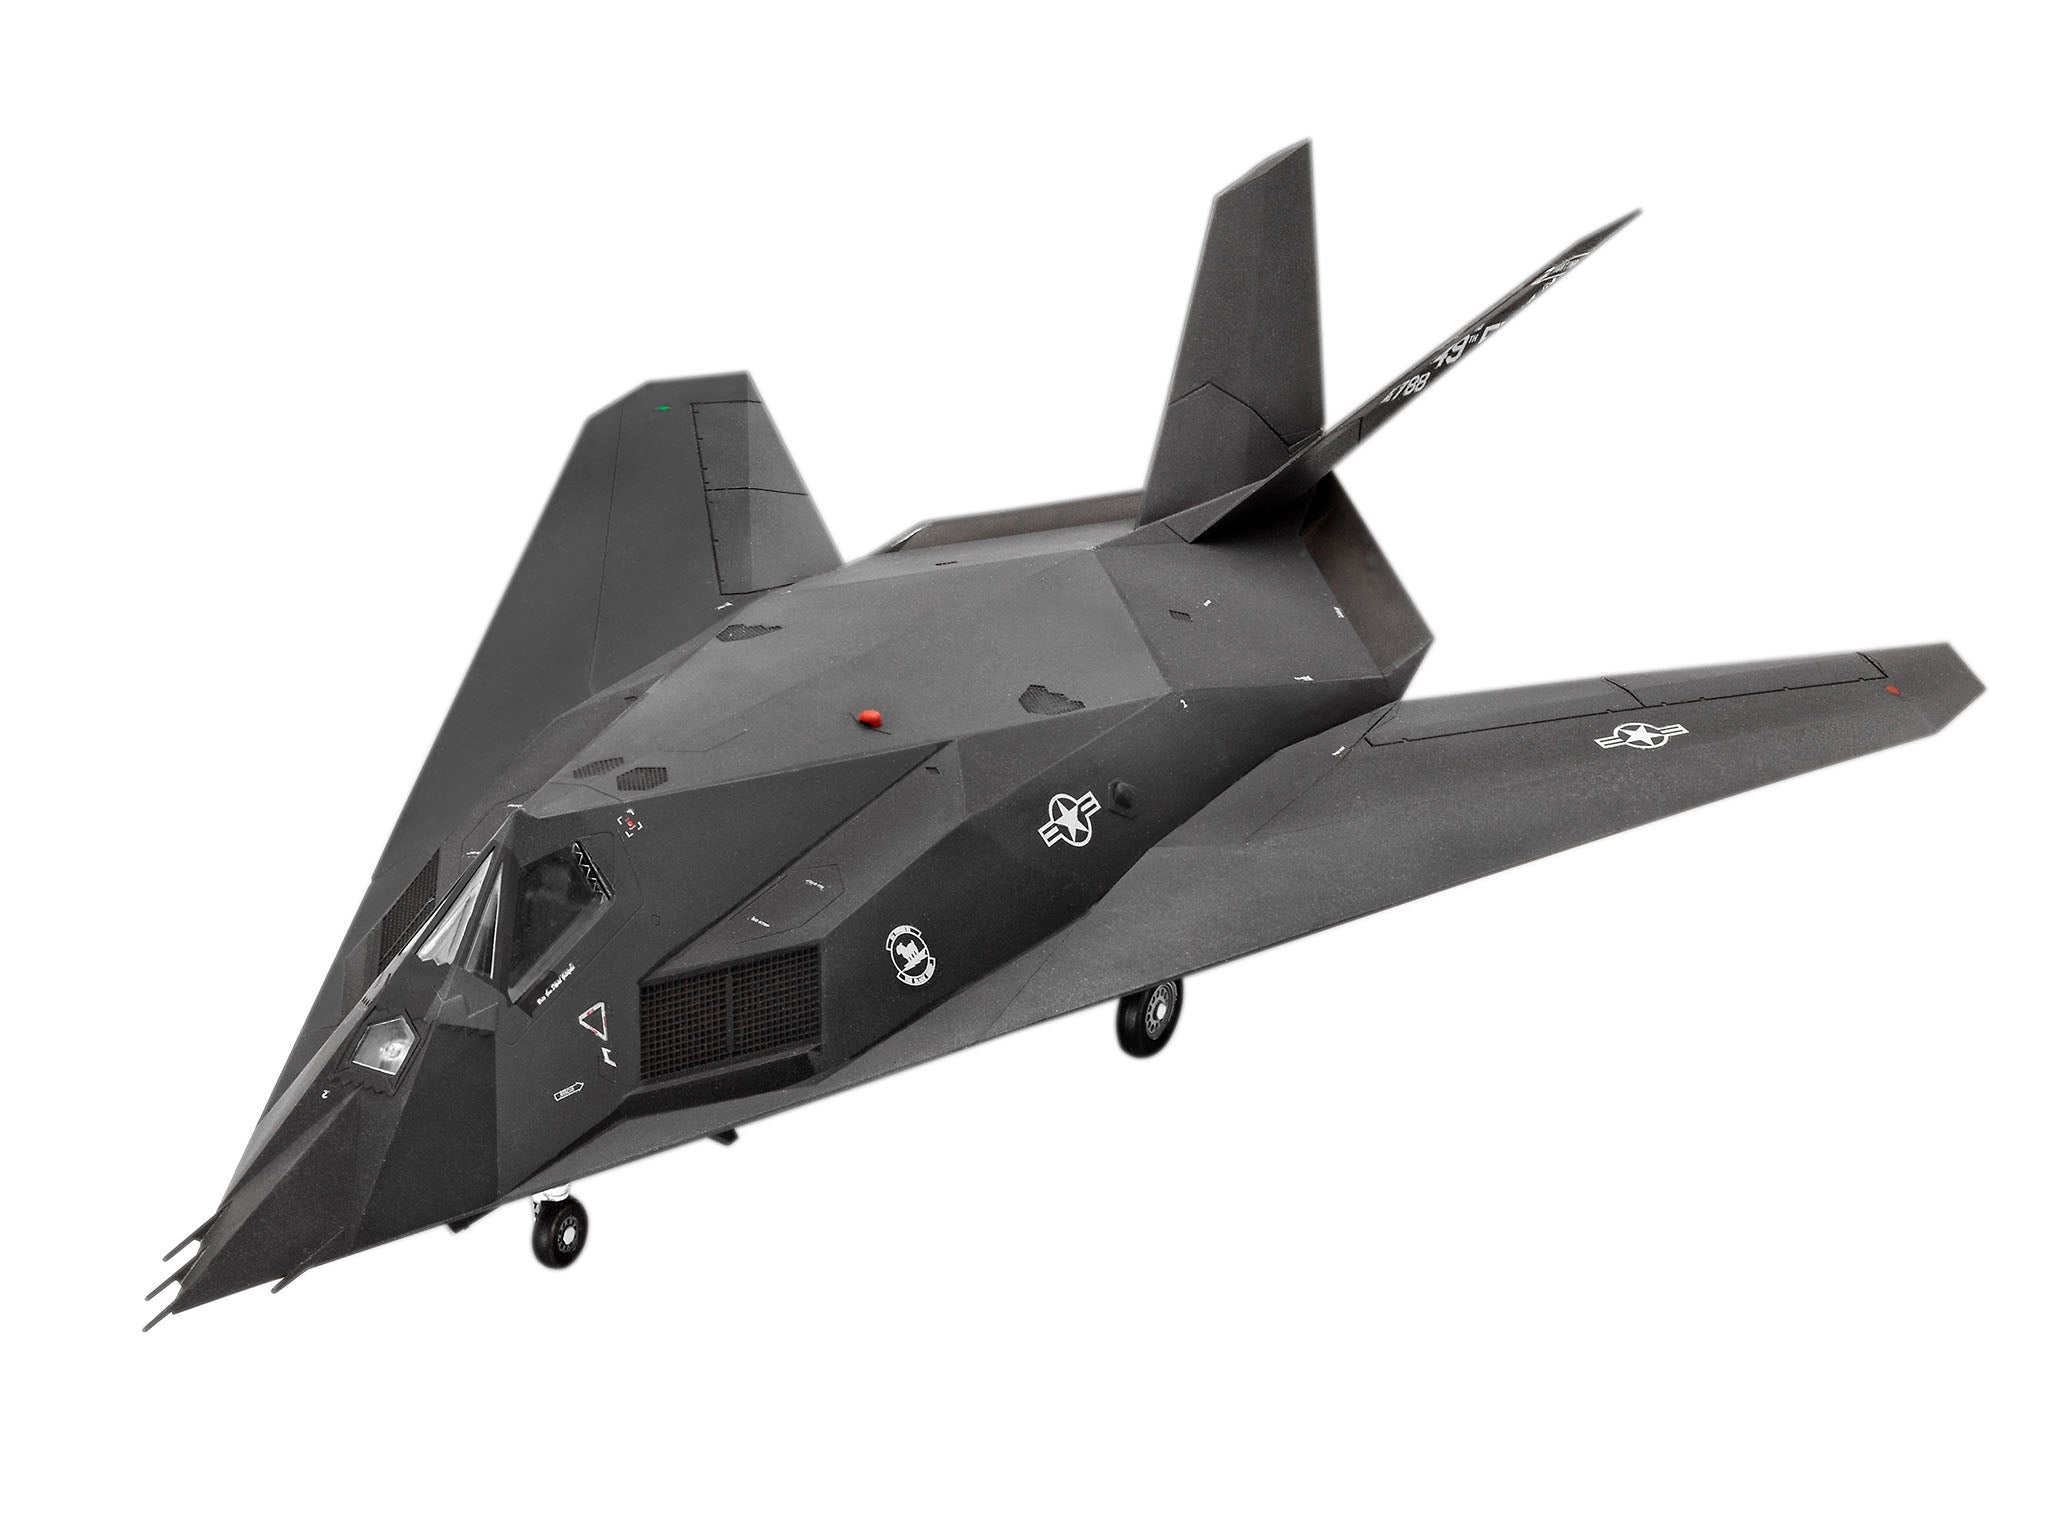 Revell F-117A Nighthawk Stealth Fighter 1:72 Airplane Model Kit